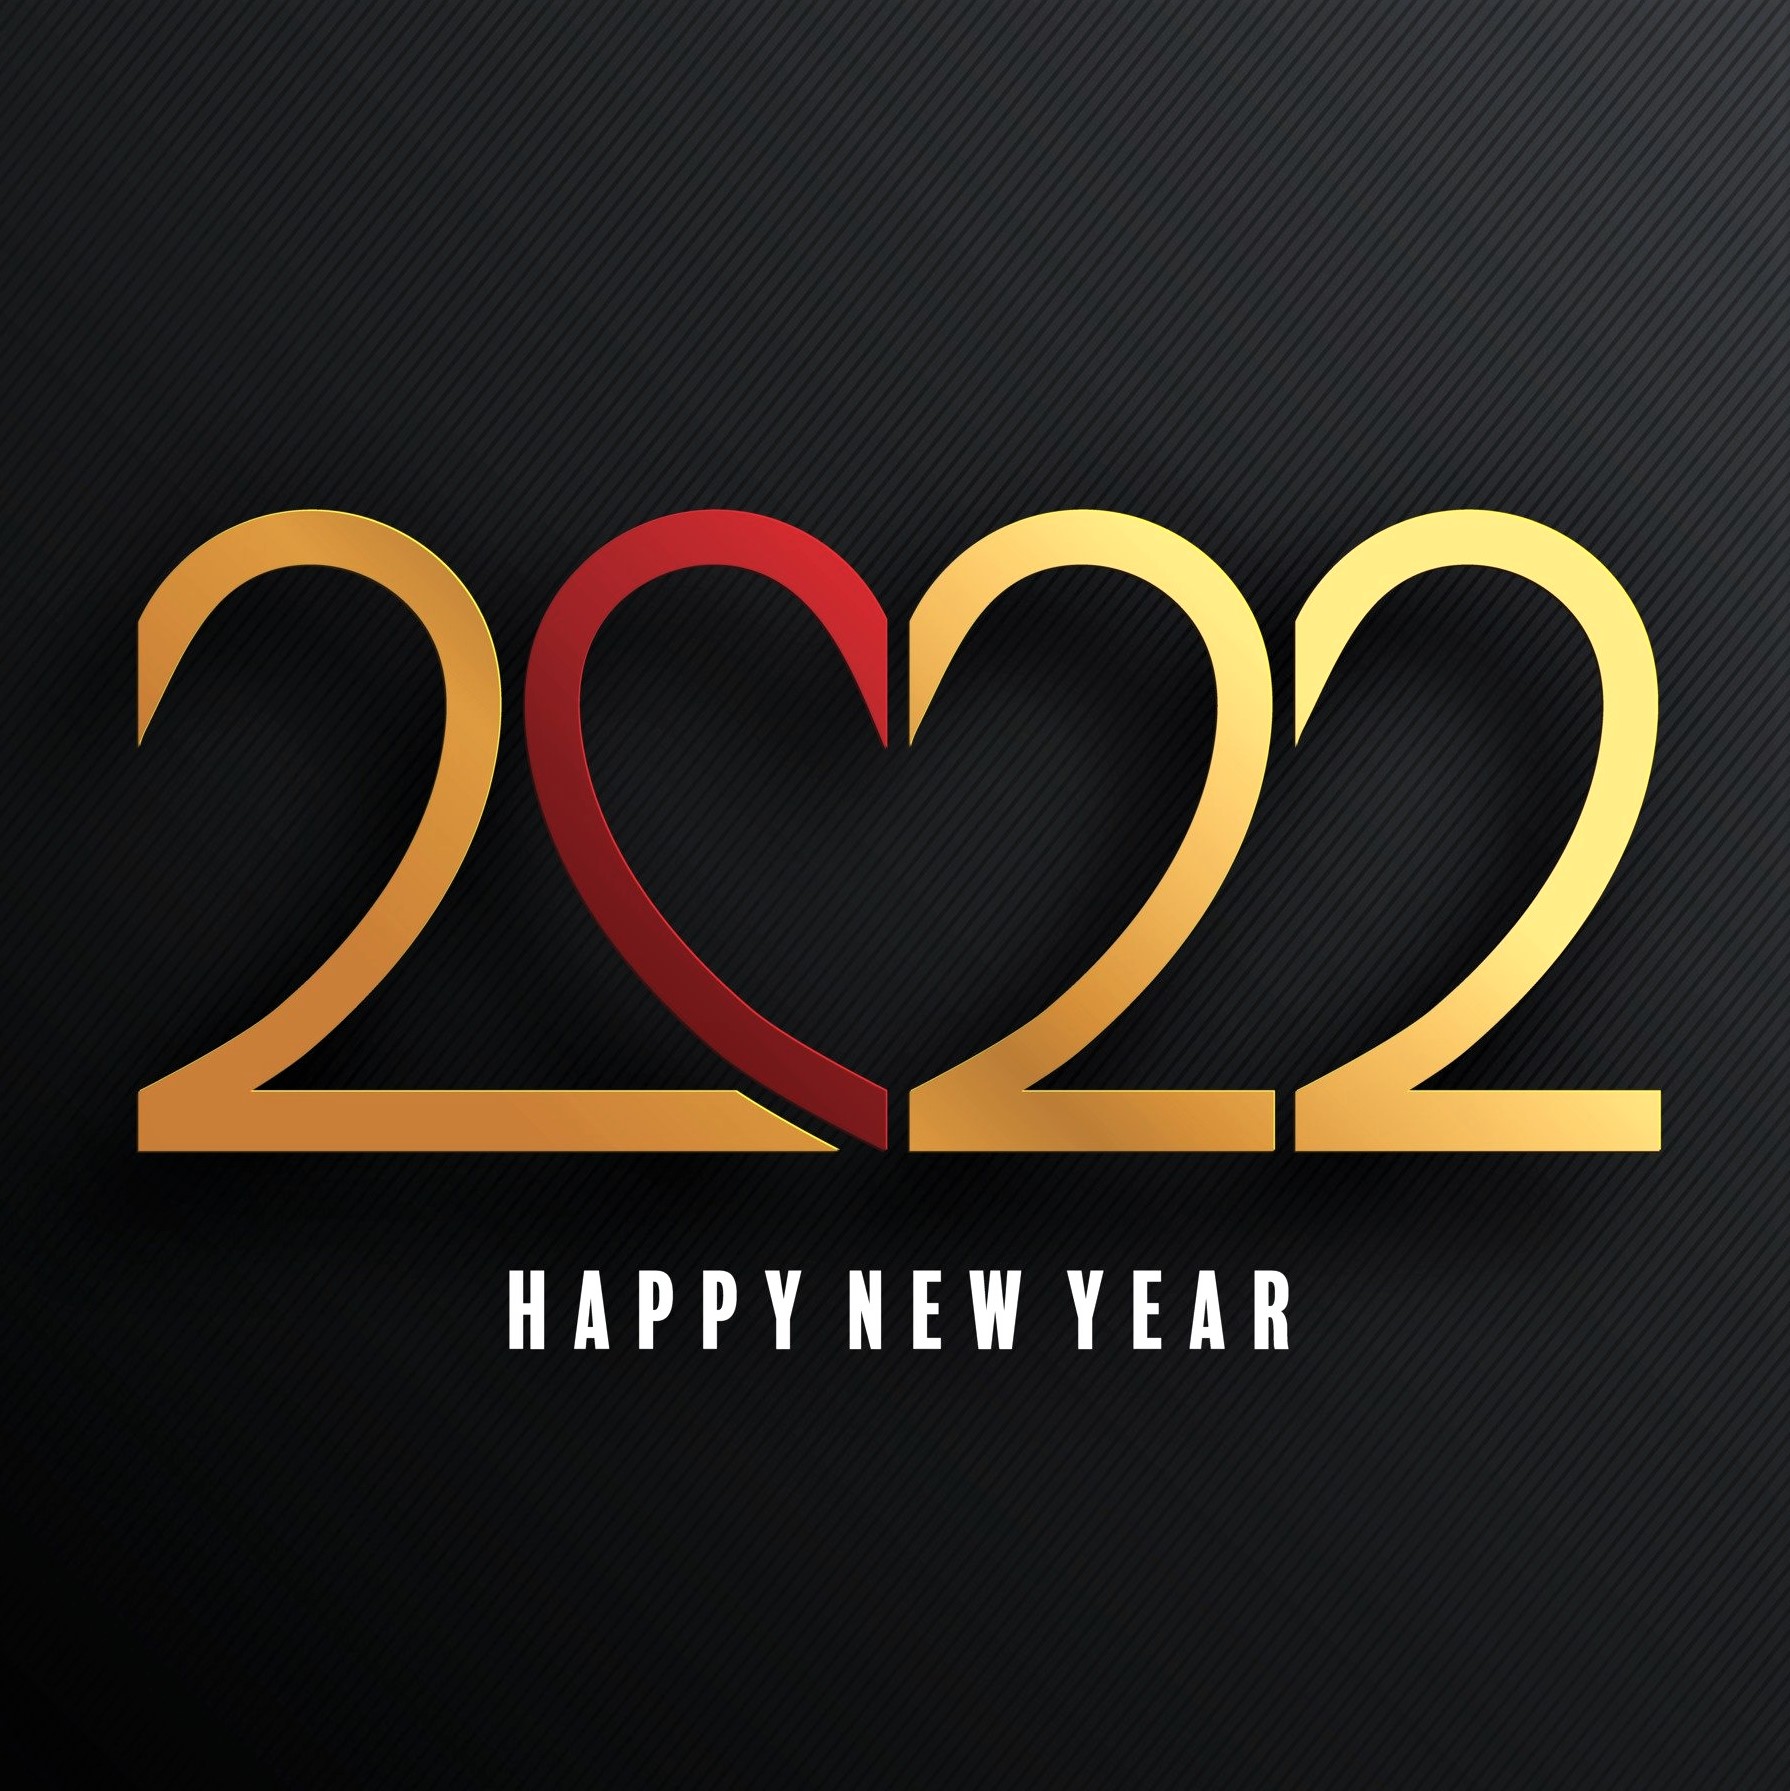 Happy new year to my family & friends: Wishing everyone a love-filled and bright 2022!